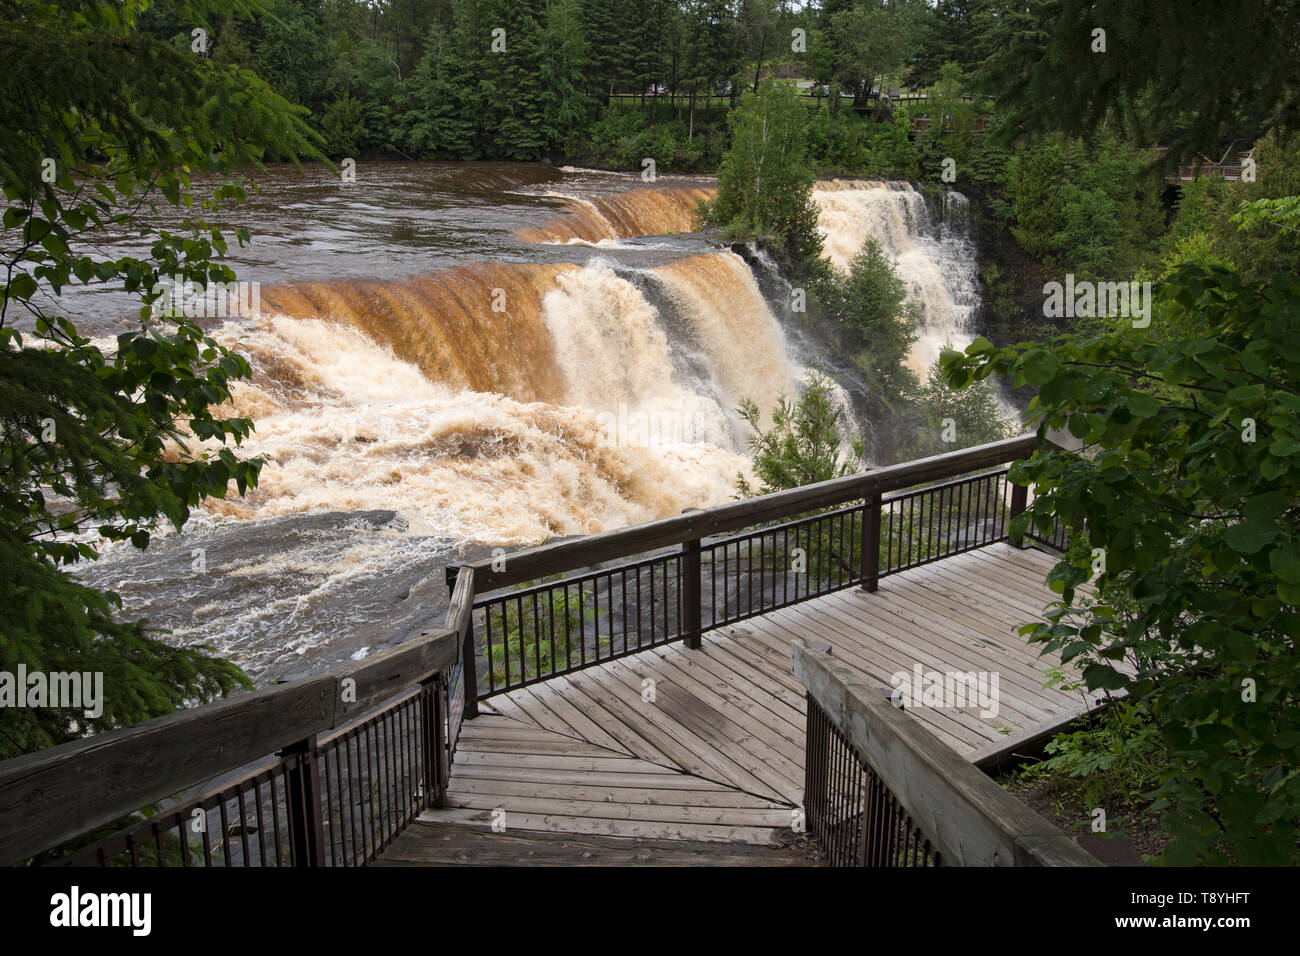 Kakabeka Falls is a waterfall on the Kaministiquia River,  west of the city of Thunder Bay, Ontario. Because of its size and ease of access, it has been nicknamed 'the Niagara of the North'. Stock Photo